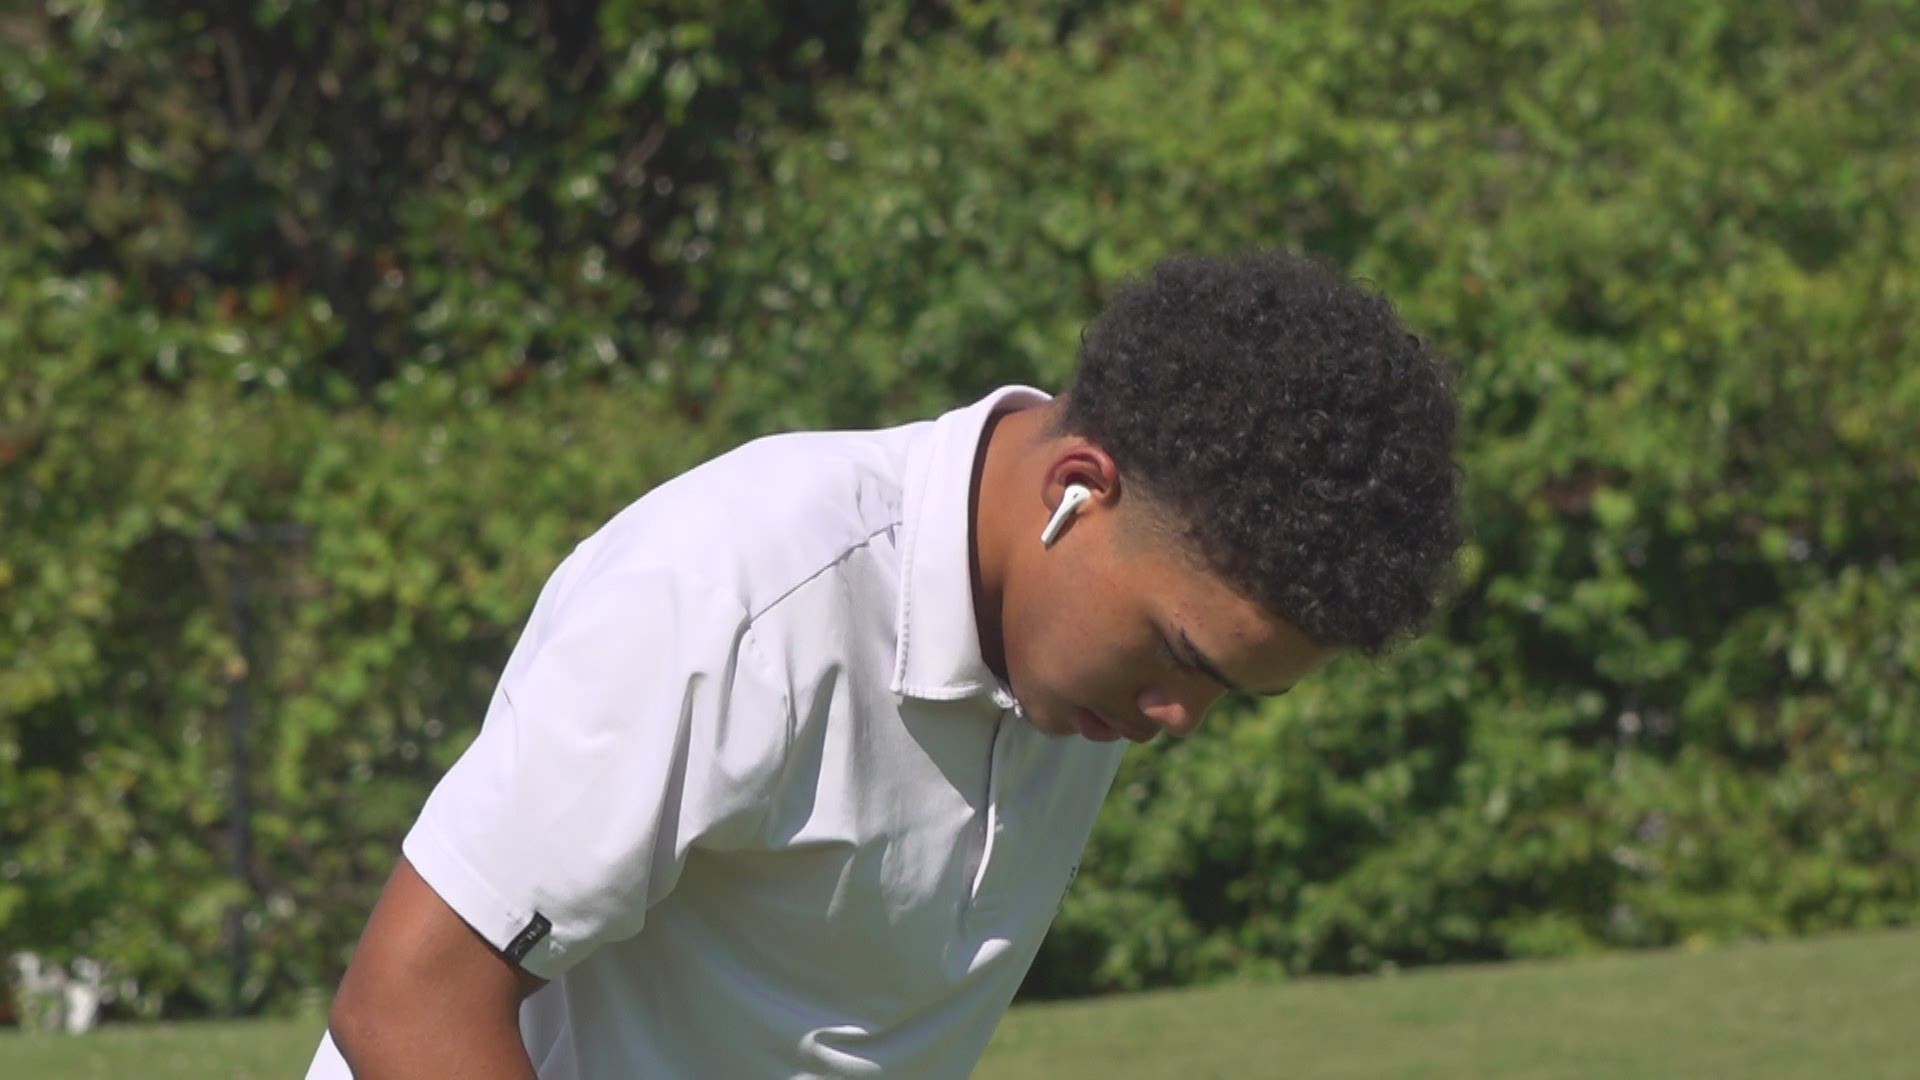 Anthony Ford, a senior at Drew Charter School in Atlanta, will compete in the PURE Insurance Championship. He will travel to California and compete alongside 77 other youth at the Pebble Beach Links.